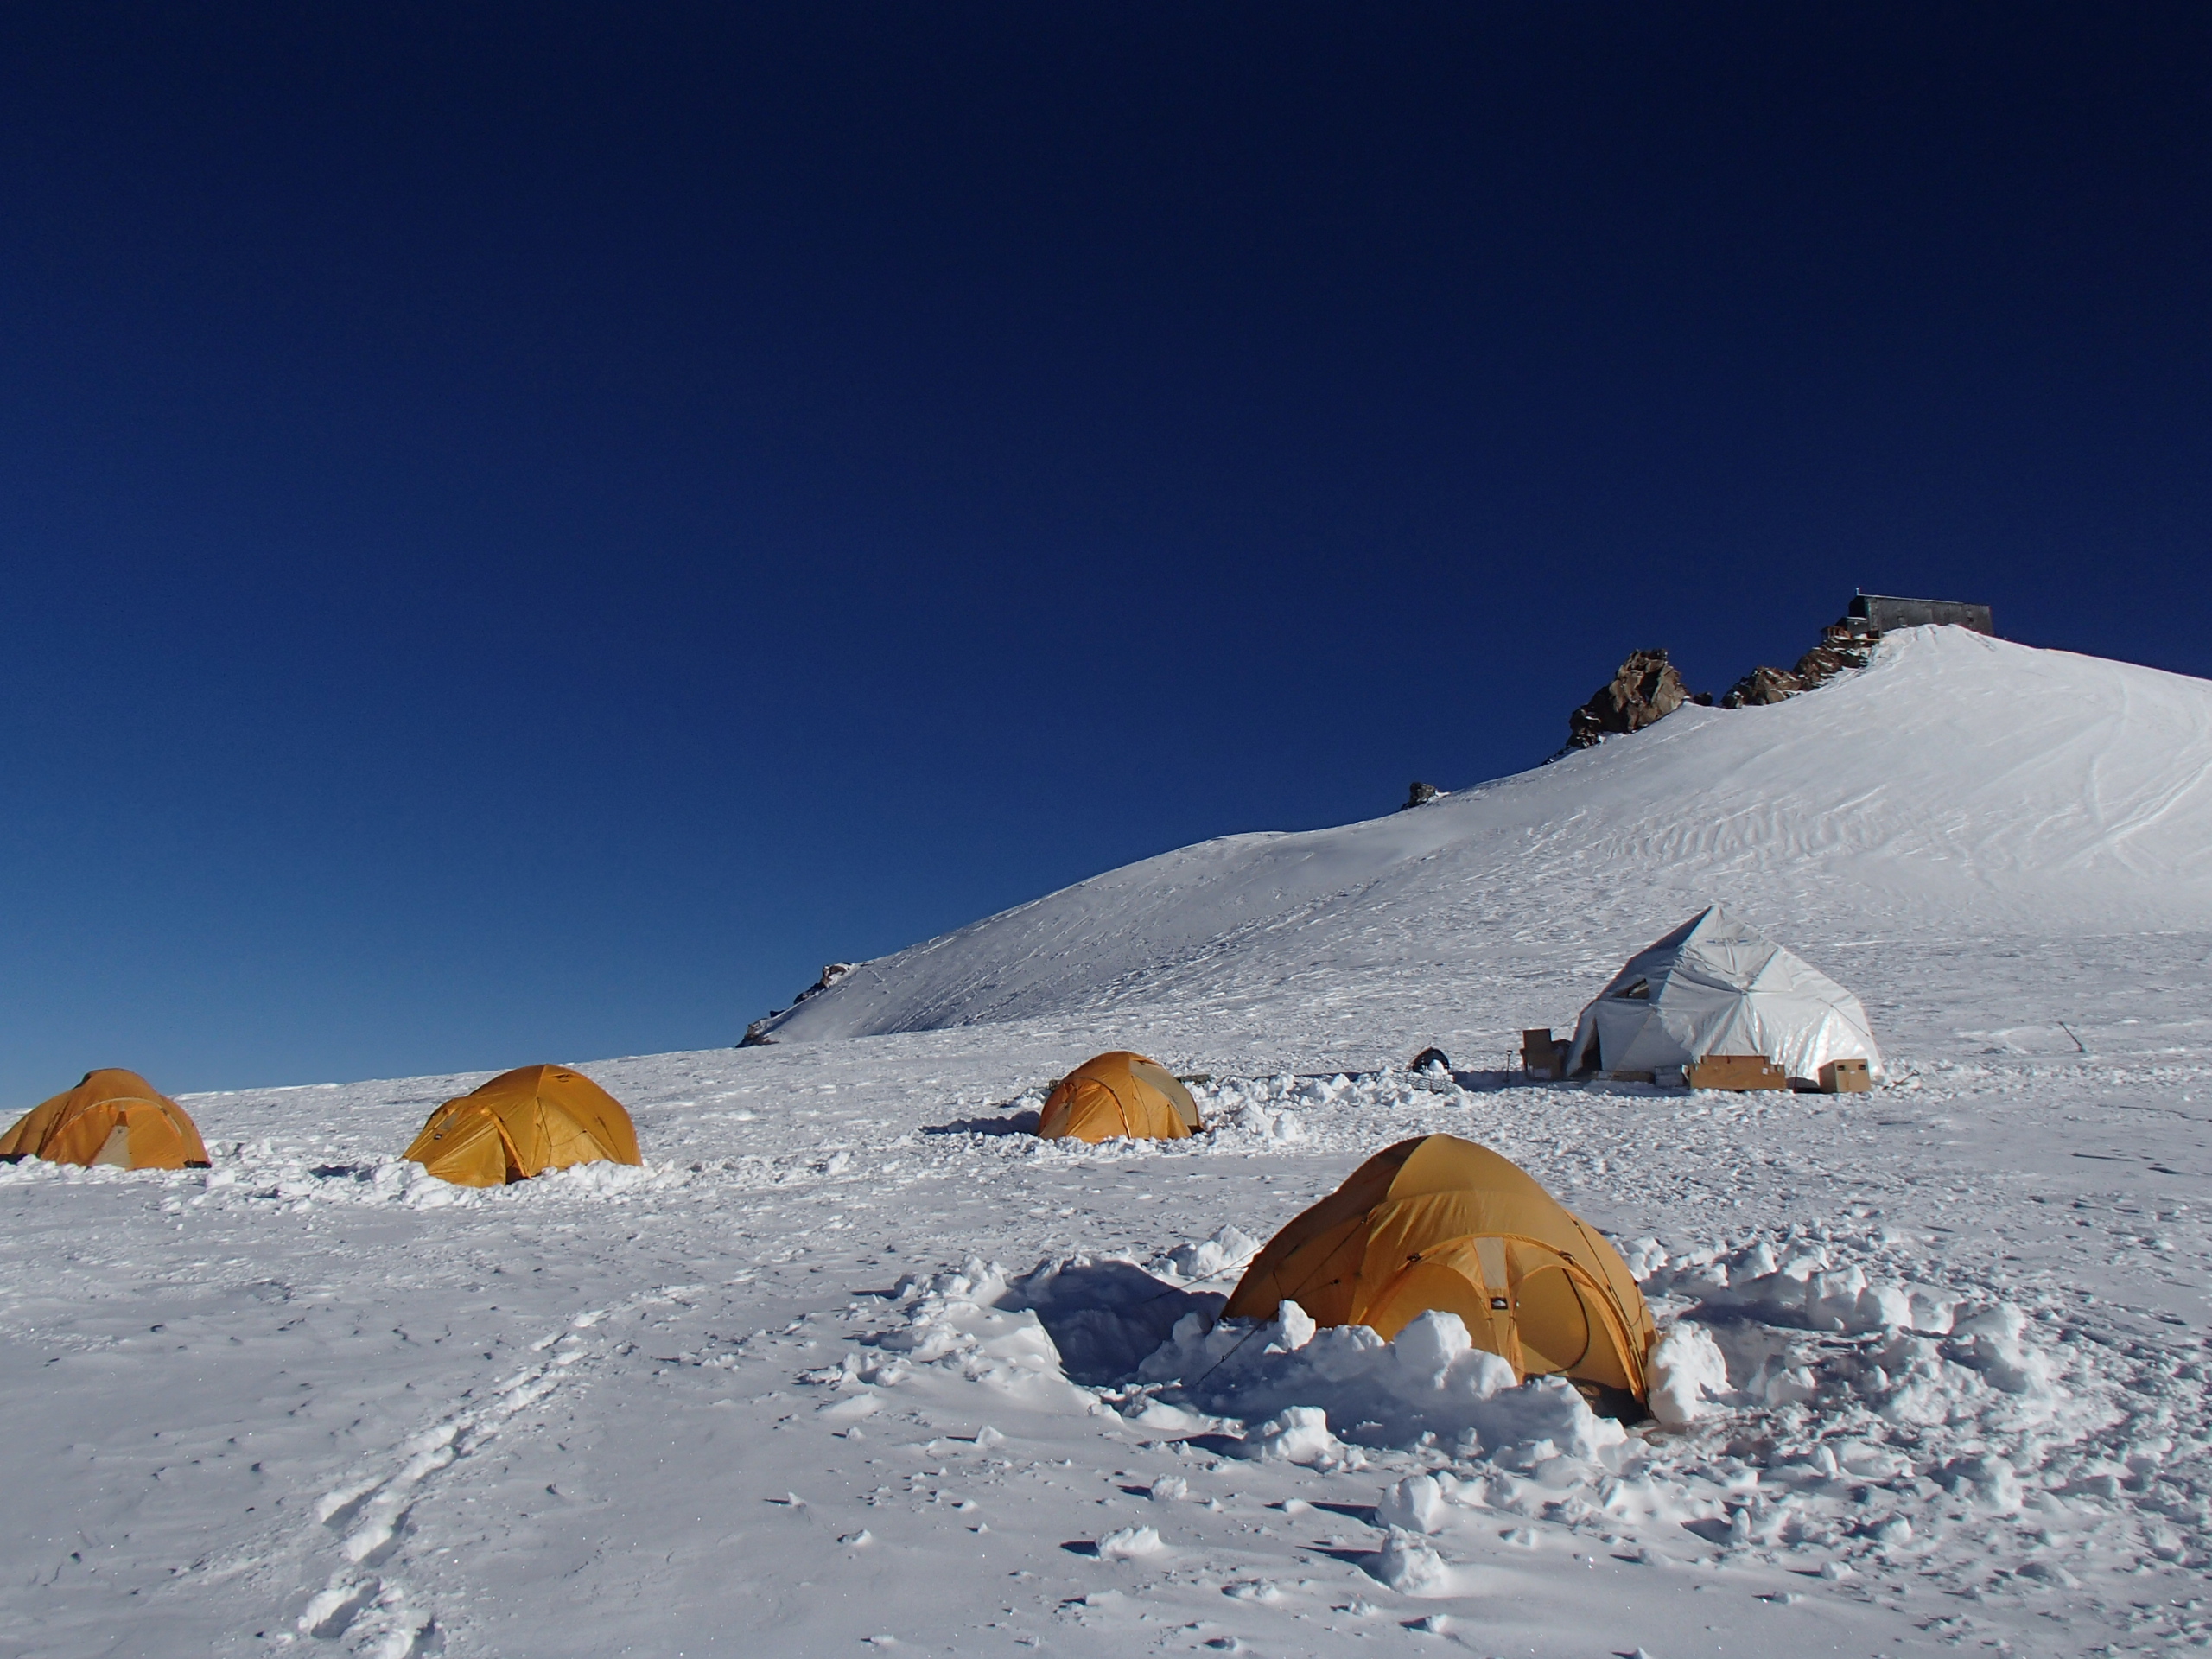 A cluster of orange tents in deep snow on a mountainside, with a blue sky.